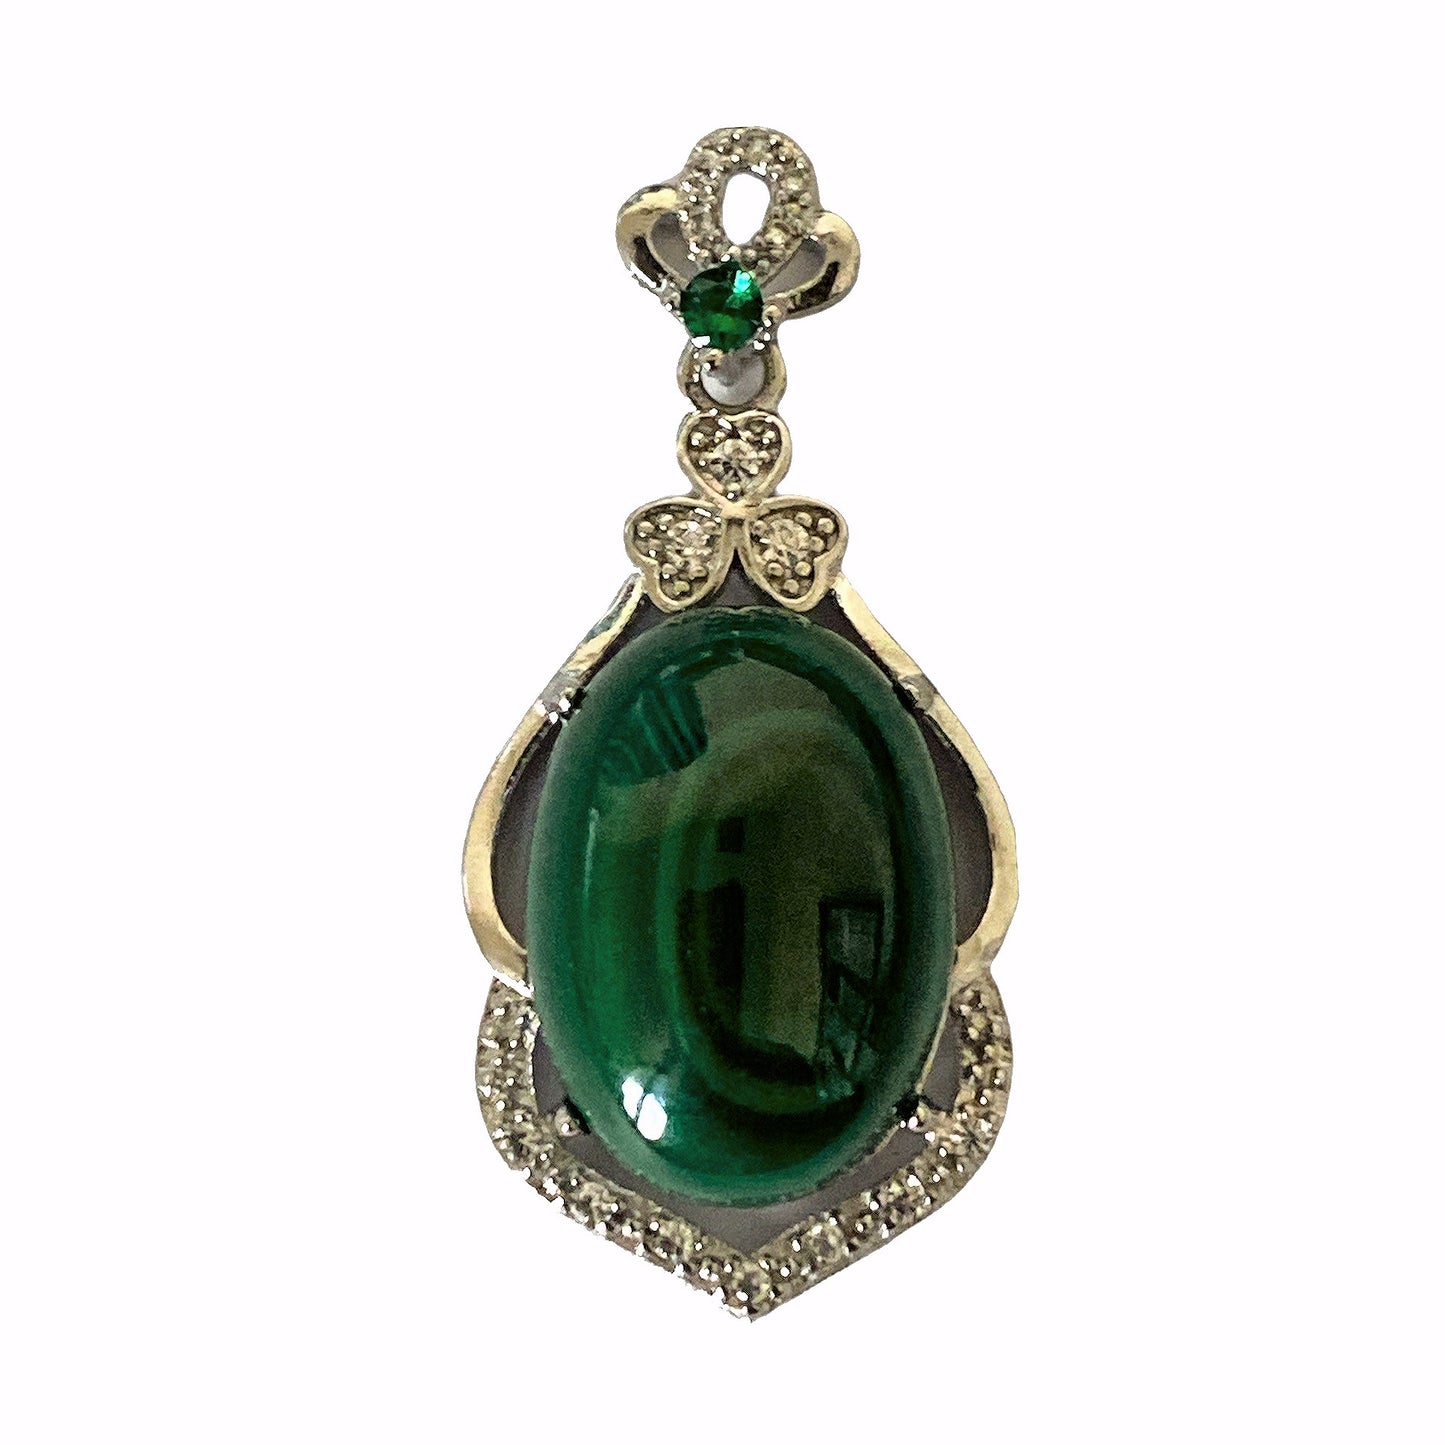 Malachite Oval Pendant with Rhinestones - Silver Color Plated Metal - 35x15mm - China - NEW922